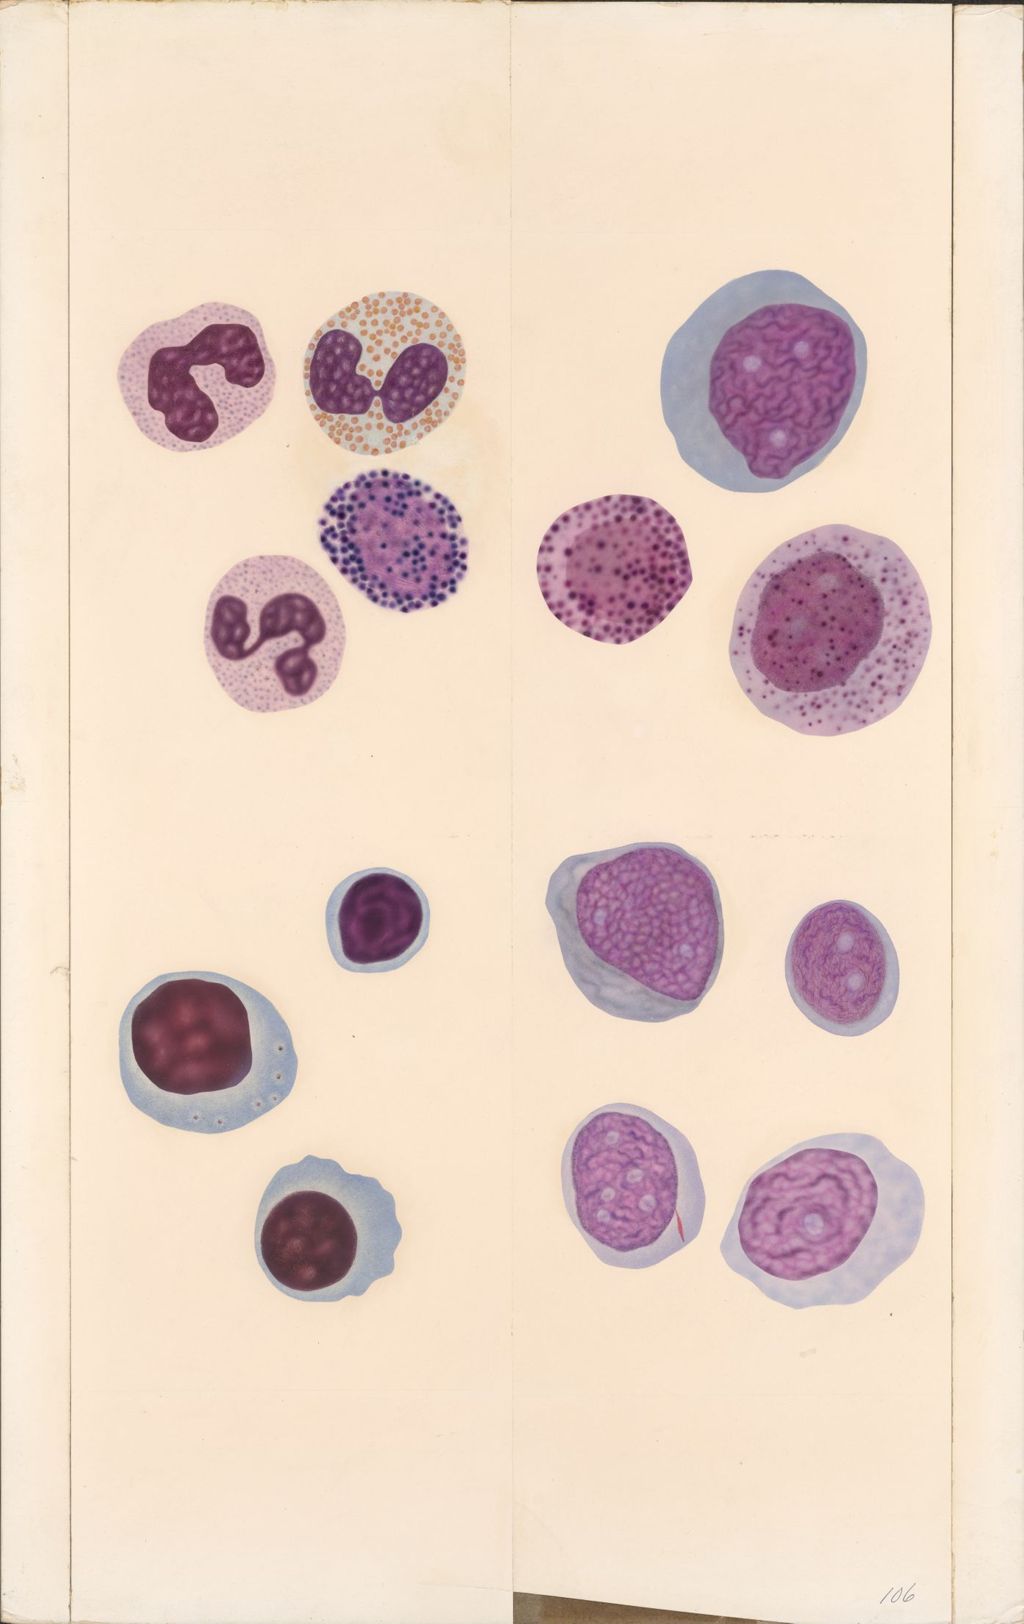 Miniature of Medical Profiles, Normal and Abnormal Blood Cells Seen In Peripheral Blood, Plate I